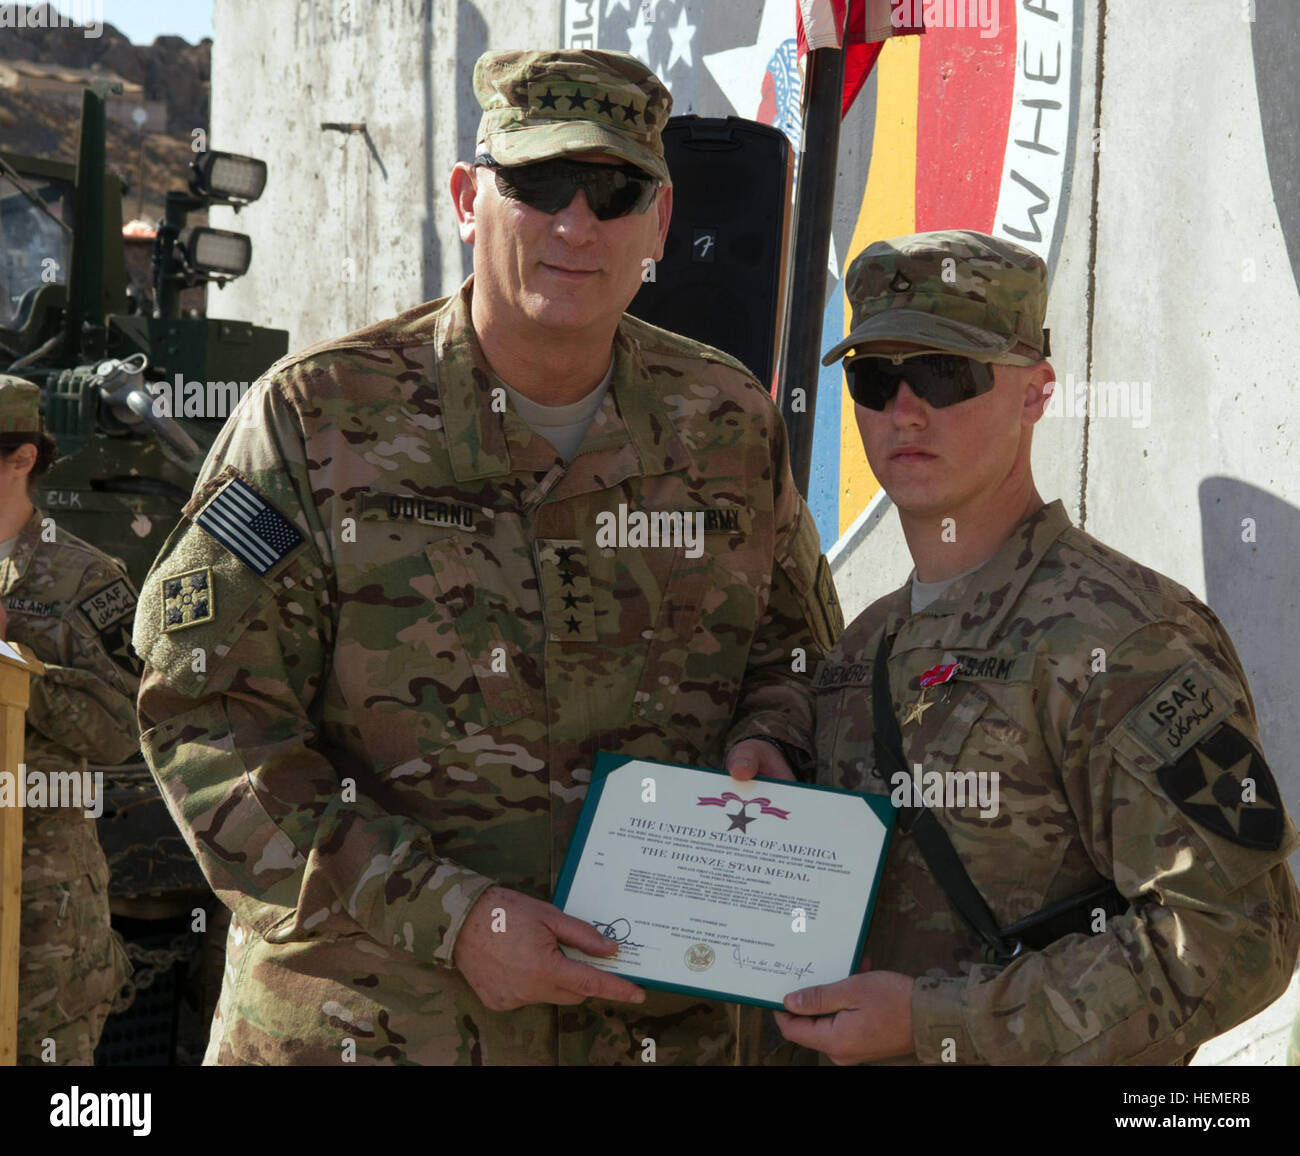 Chief of Staff of the U.S. Army Gen. Raymond T. Odierno awards a Bronze Star Medal for Valor to Pfc. Brelian Rosenberg during a ceremony at Forward Operating Base Masum Ghar, Kandahar province, Afghanistan, Feb. 22, 2013. Rosenberg is a medic assigned to the 4th Stryker Brigade  Combat Team, 2nd Infantry Division. (U.S. Army Photo by Staff Sgt. Teddy Wade/Released) Odierno visits troops in Regional Command South, Afghanistan 130222-A-AO884-219 Stock Photo